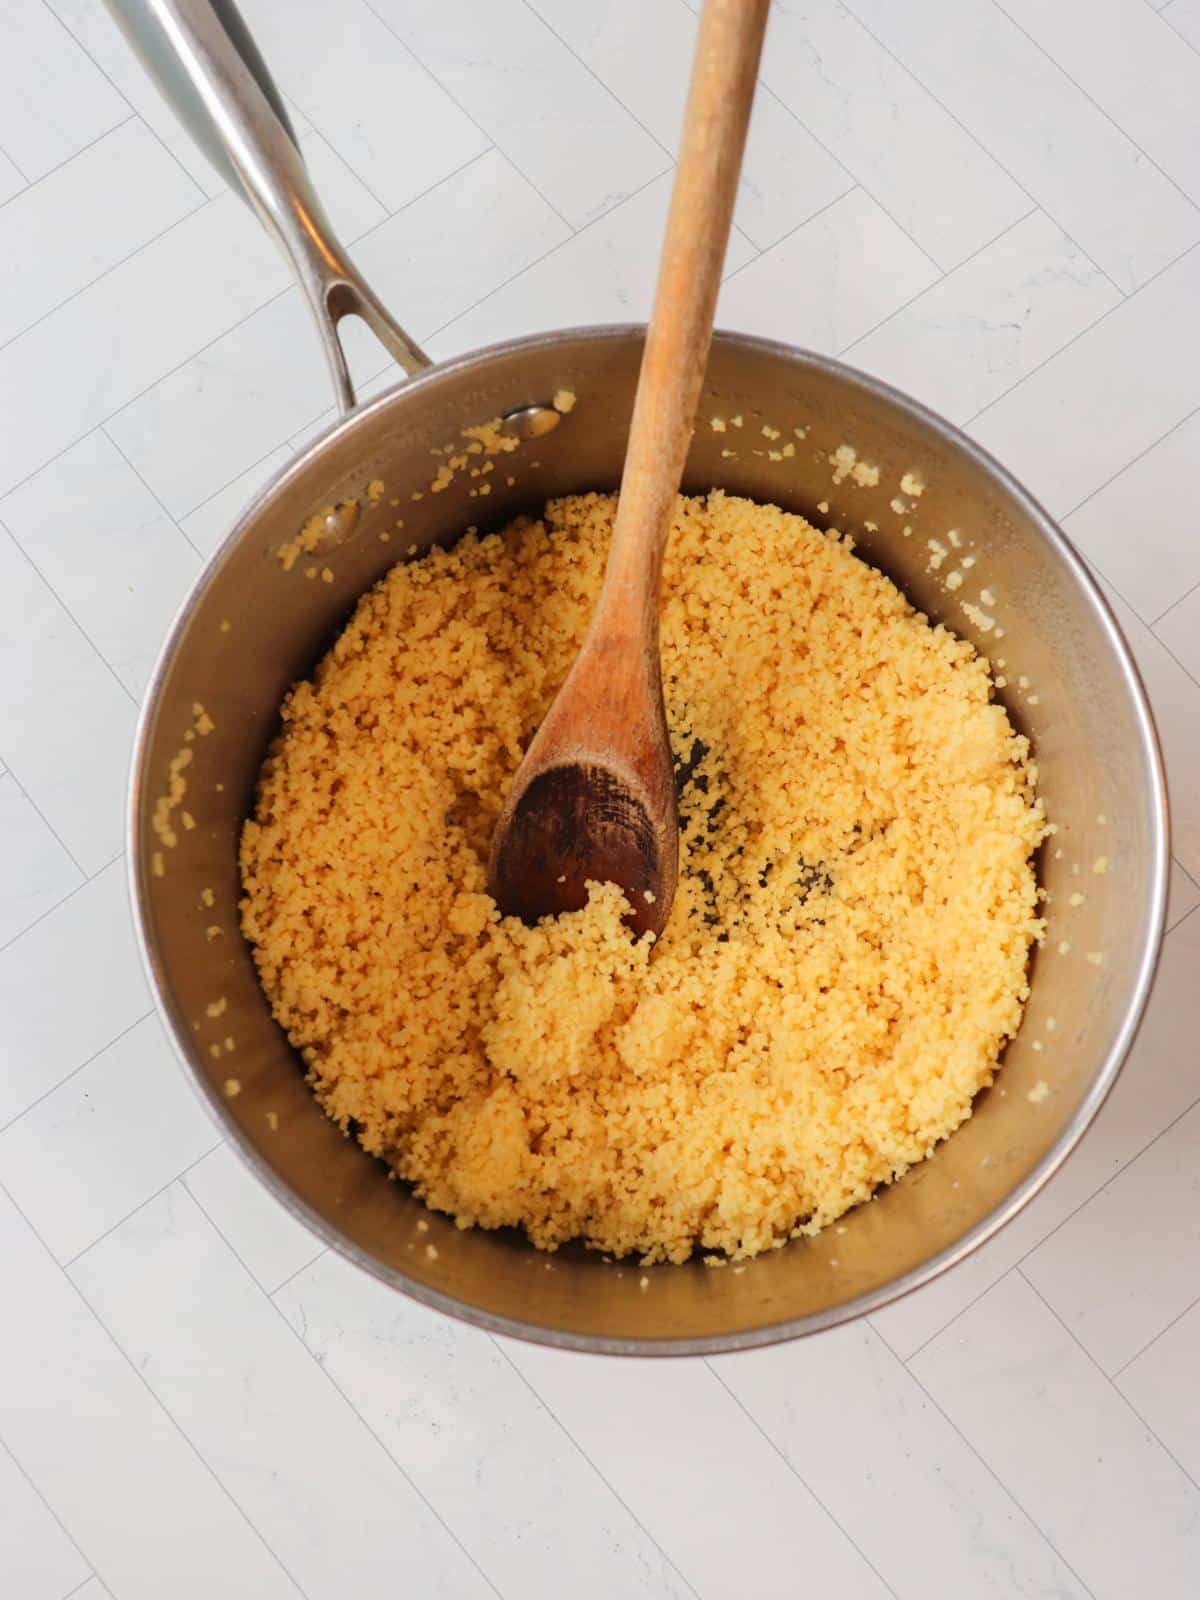 Couscous in a pan after being cooked.